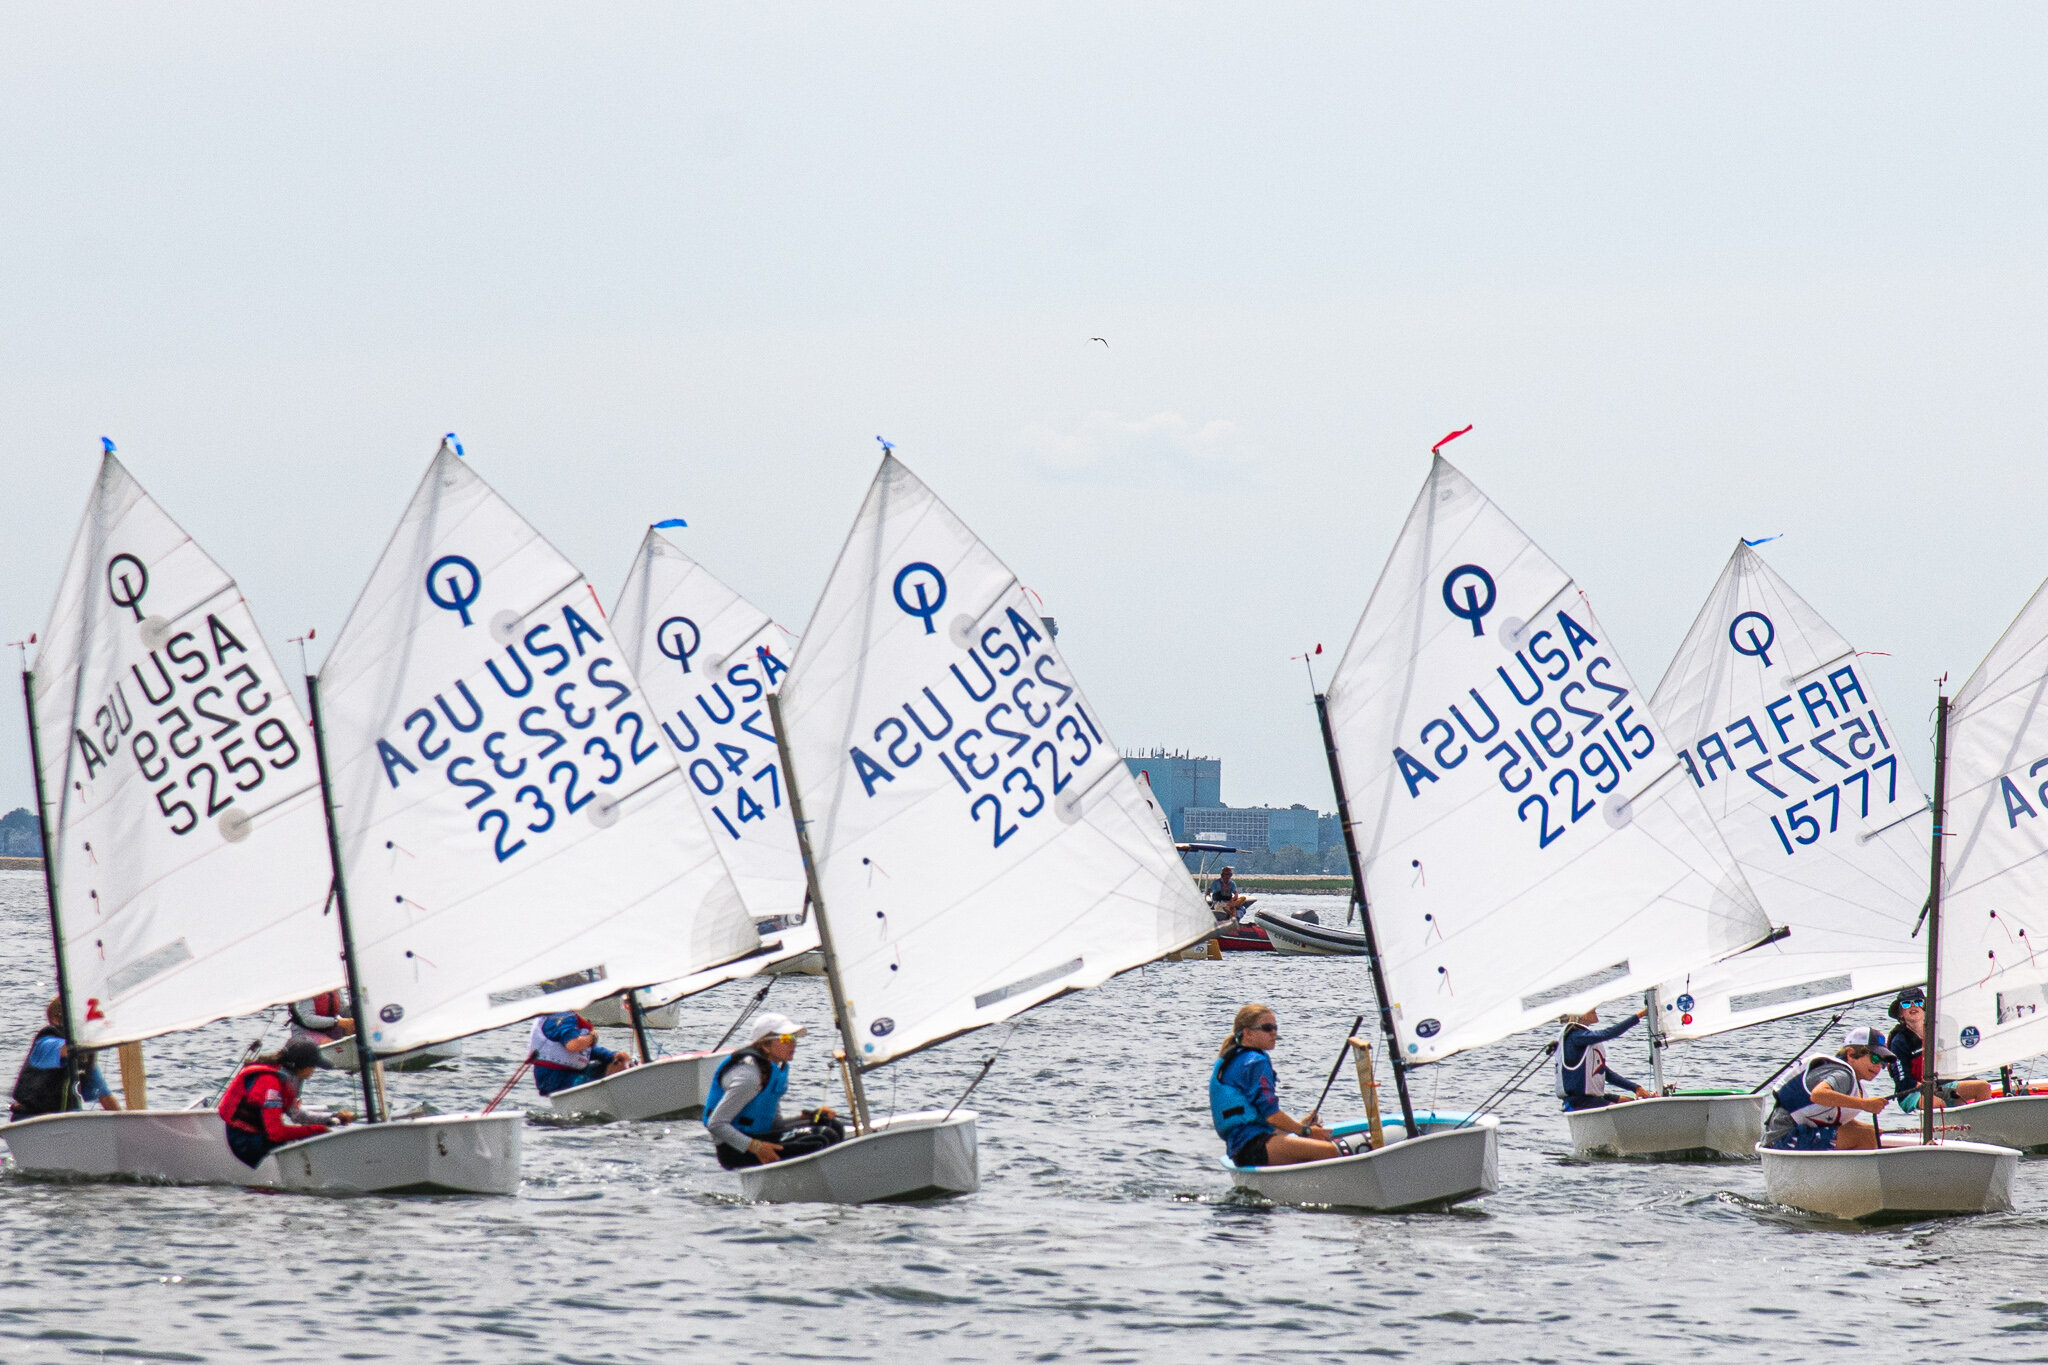 Over 80 Kids from 9 Clubs Race in Opti Sailing Regatta off of